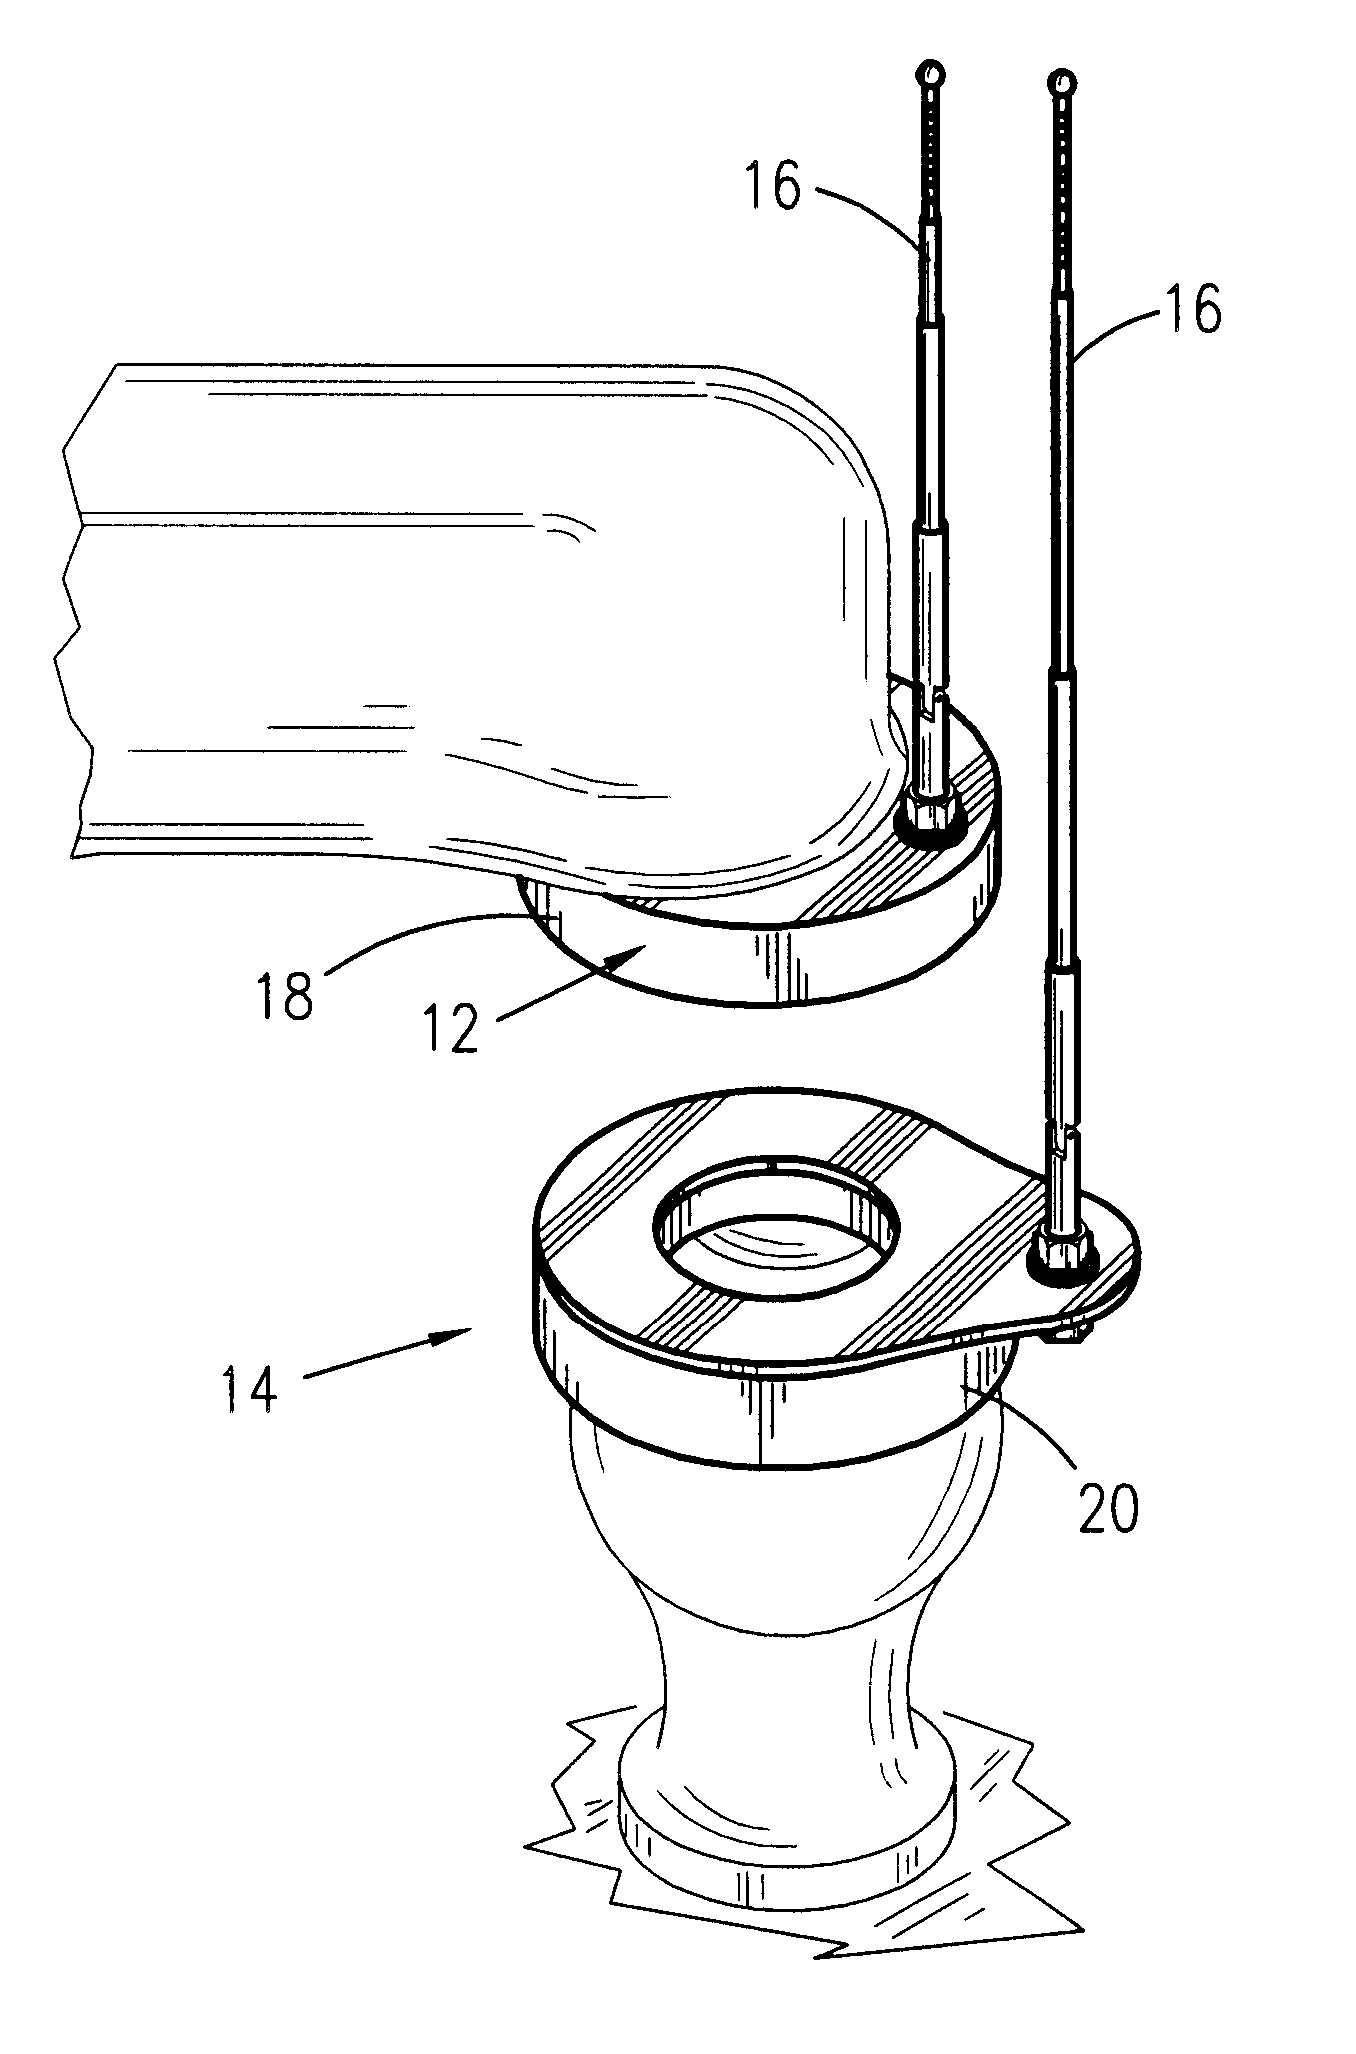 Magnetic, telescoping trailer hitch alignment device